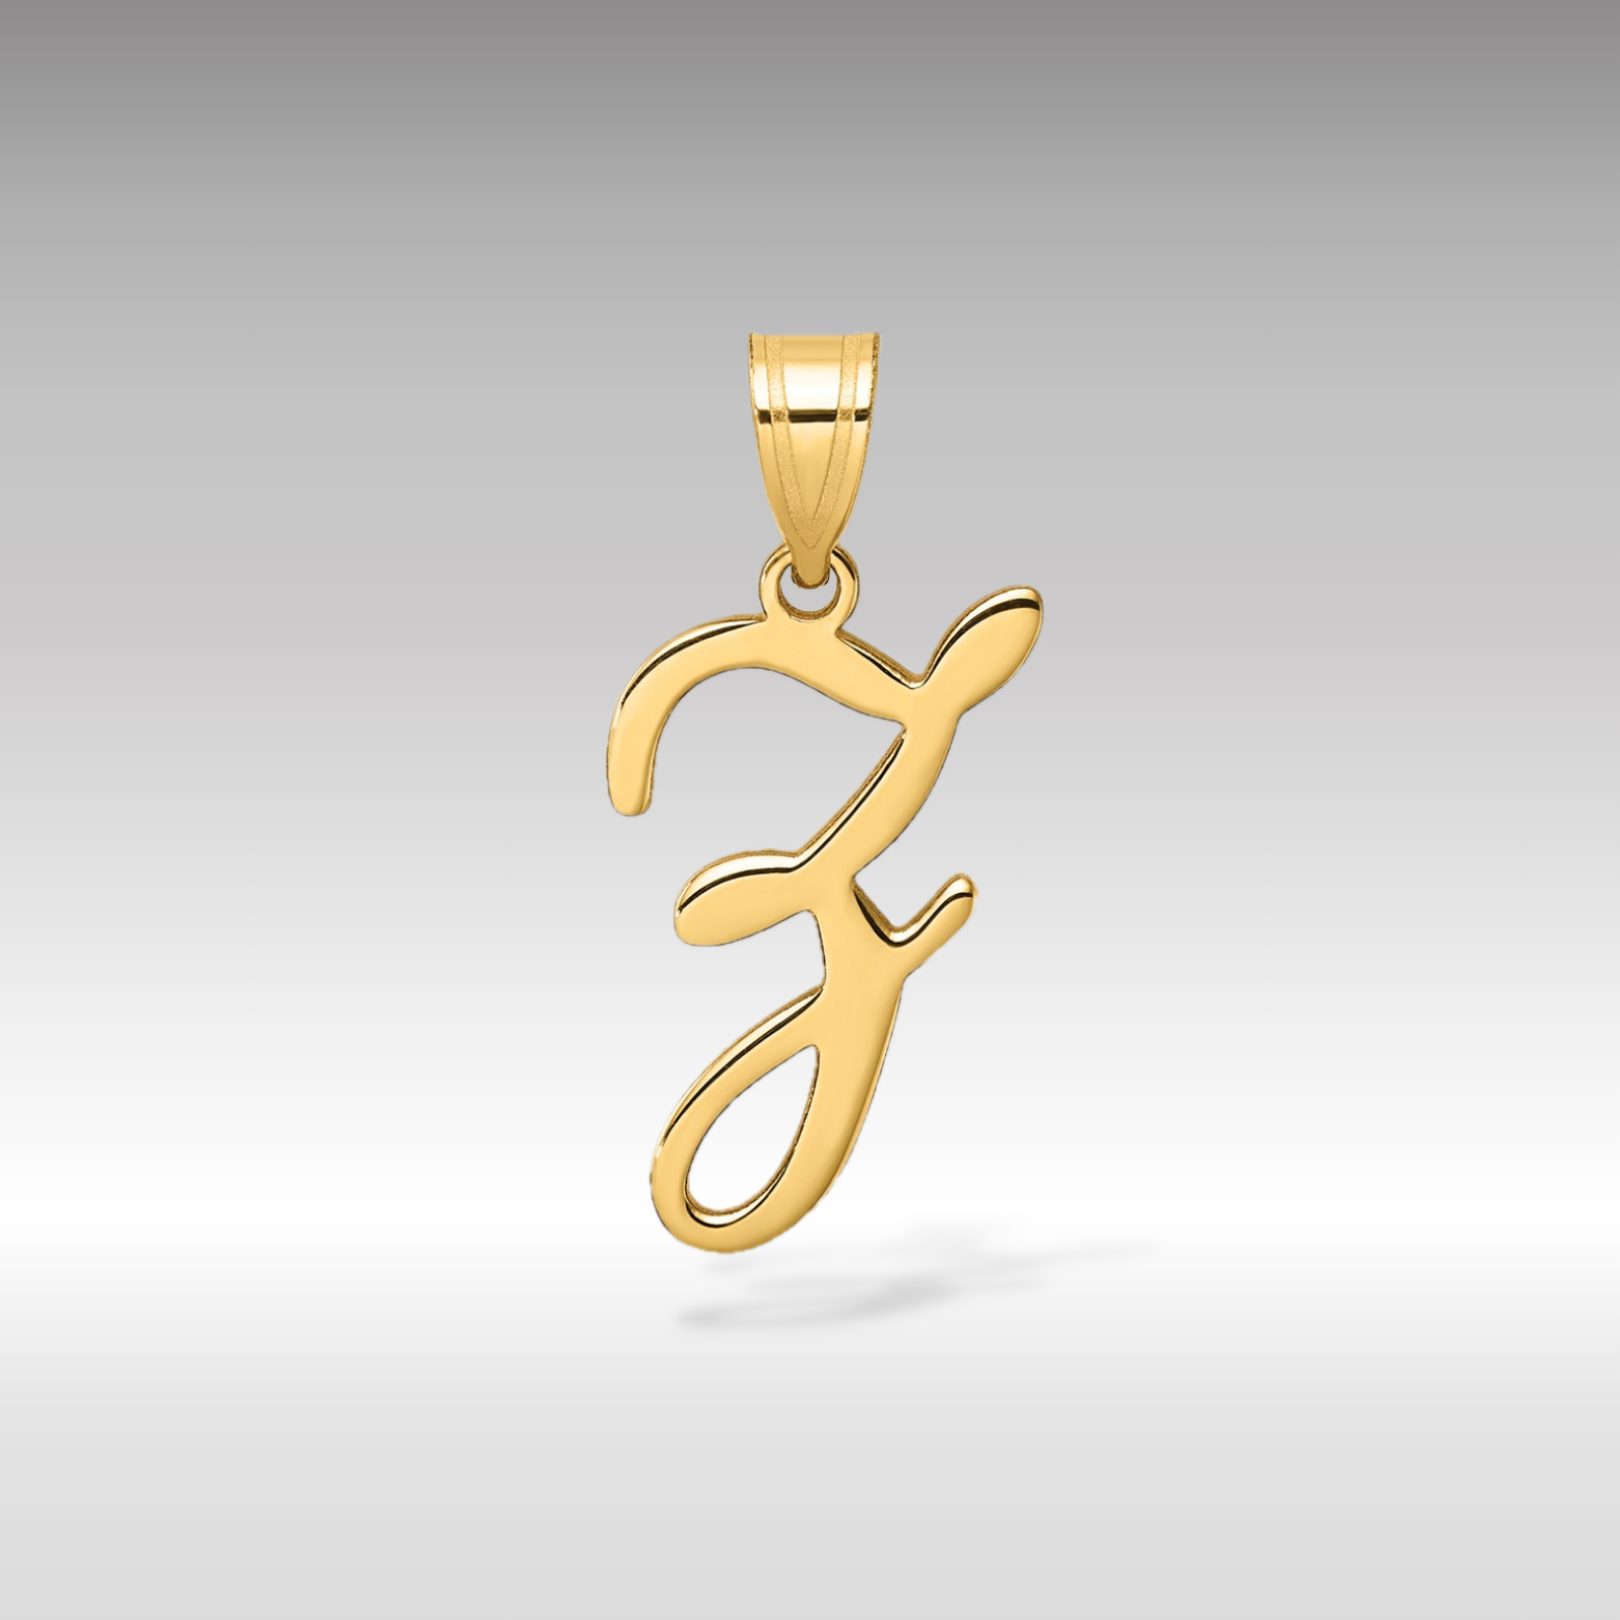 14K Gold Large Letter "Z" Script Initial Pendant - Charlie & Co. Jewelry